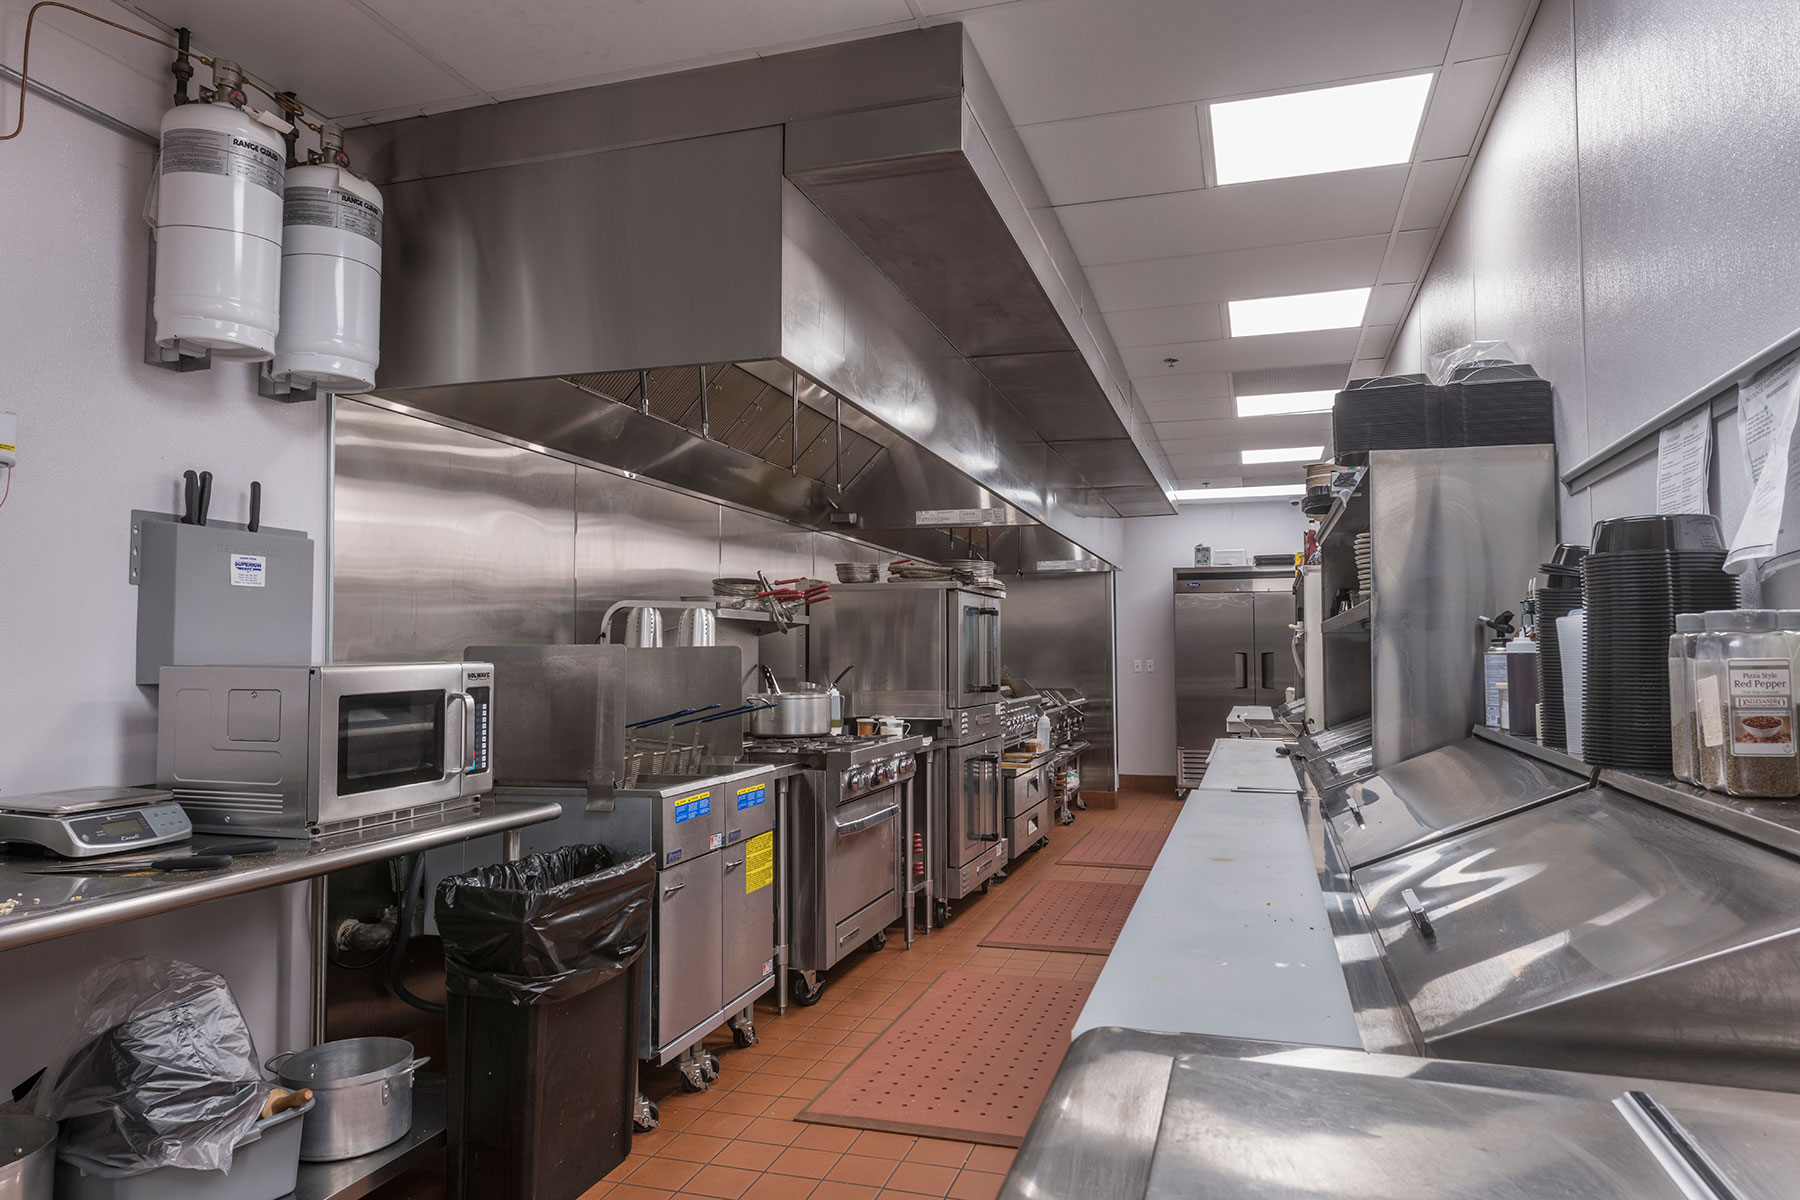 Commercial cooking hood with equipment - Four Seasons Steak & Grill Restaurant, Addison Custom Home. America's Custom Home Builders: New Construction, Remodeling, Restoration Services. Residential and Commercial.